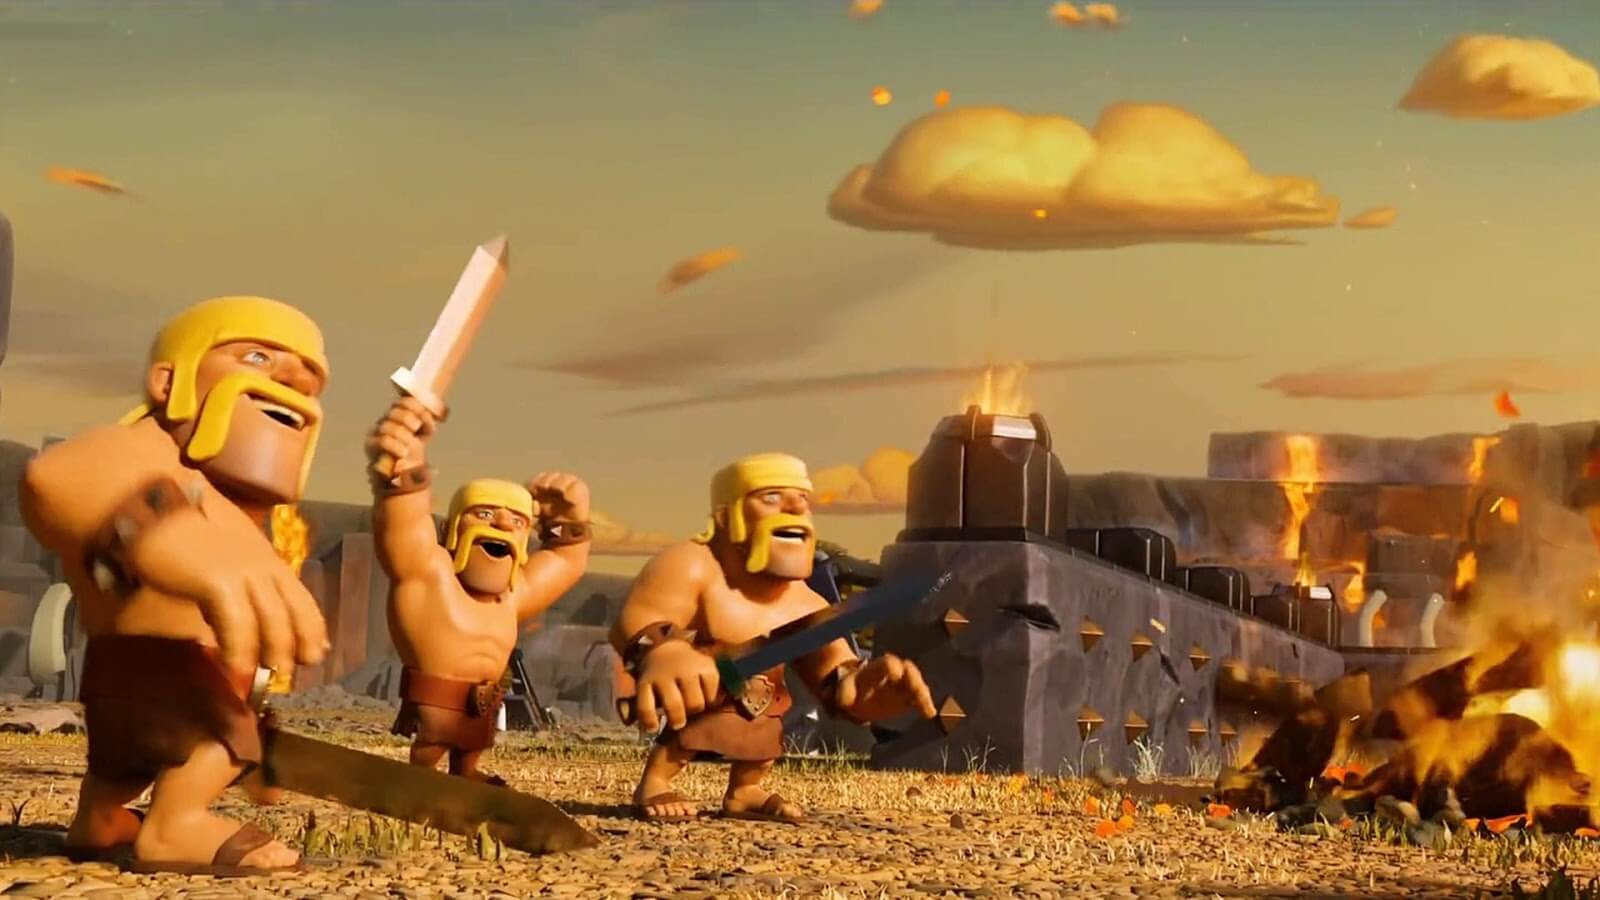 Clash of Clans Barbarian Wallpaper